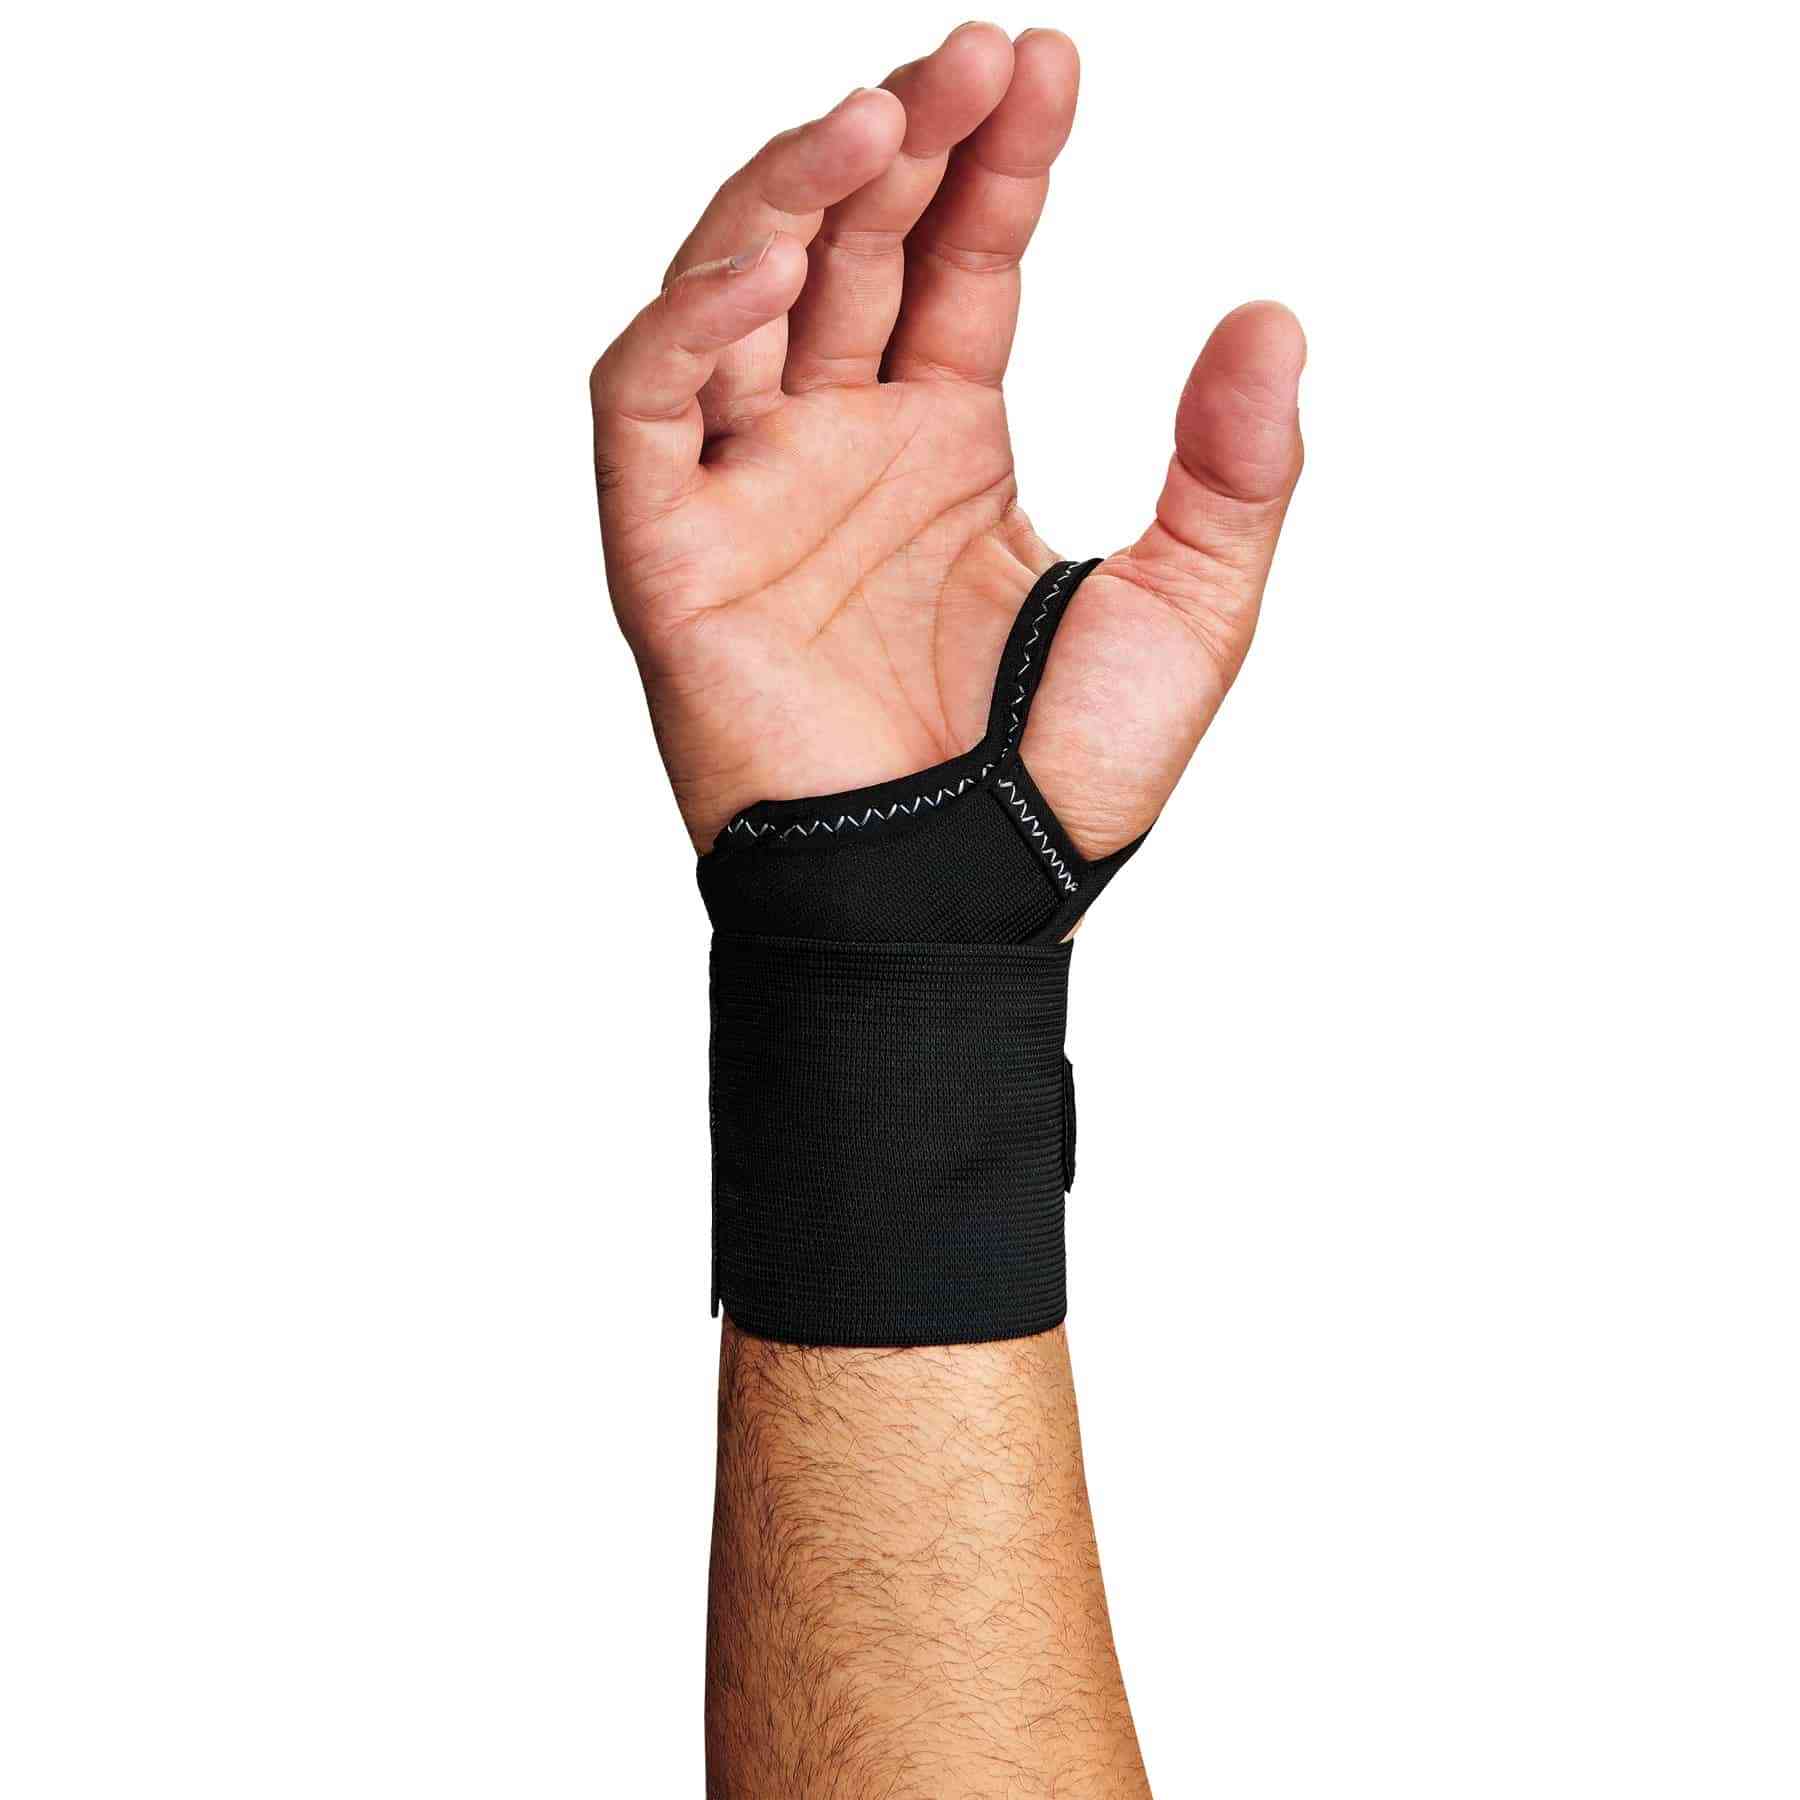 Use Wrist Wraps to Improve Wrist Support and Stability